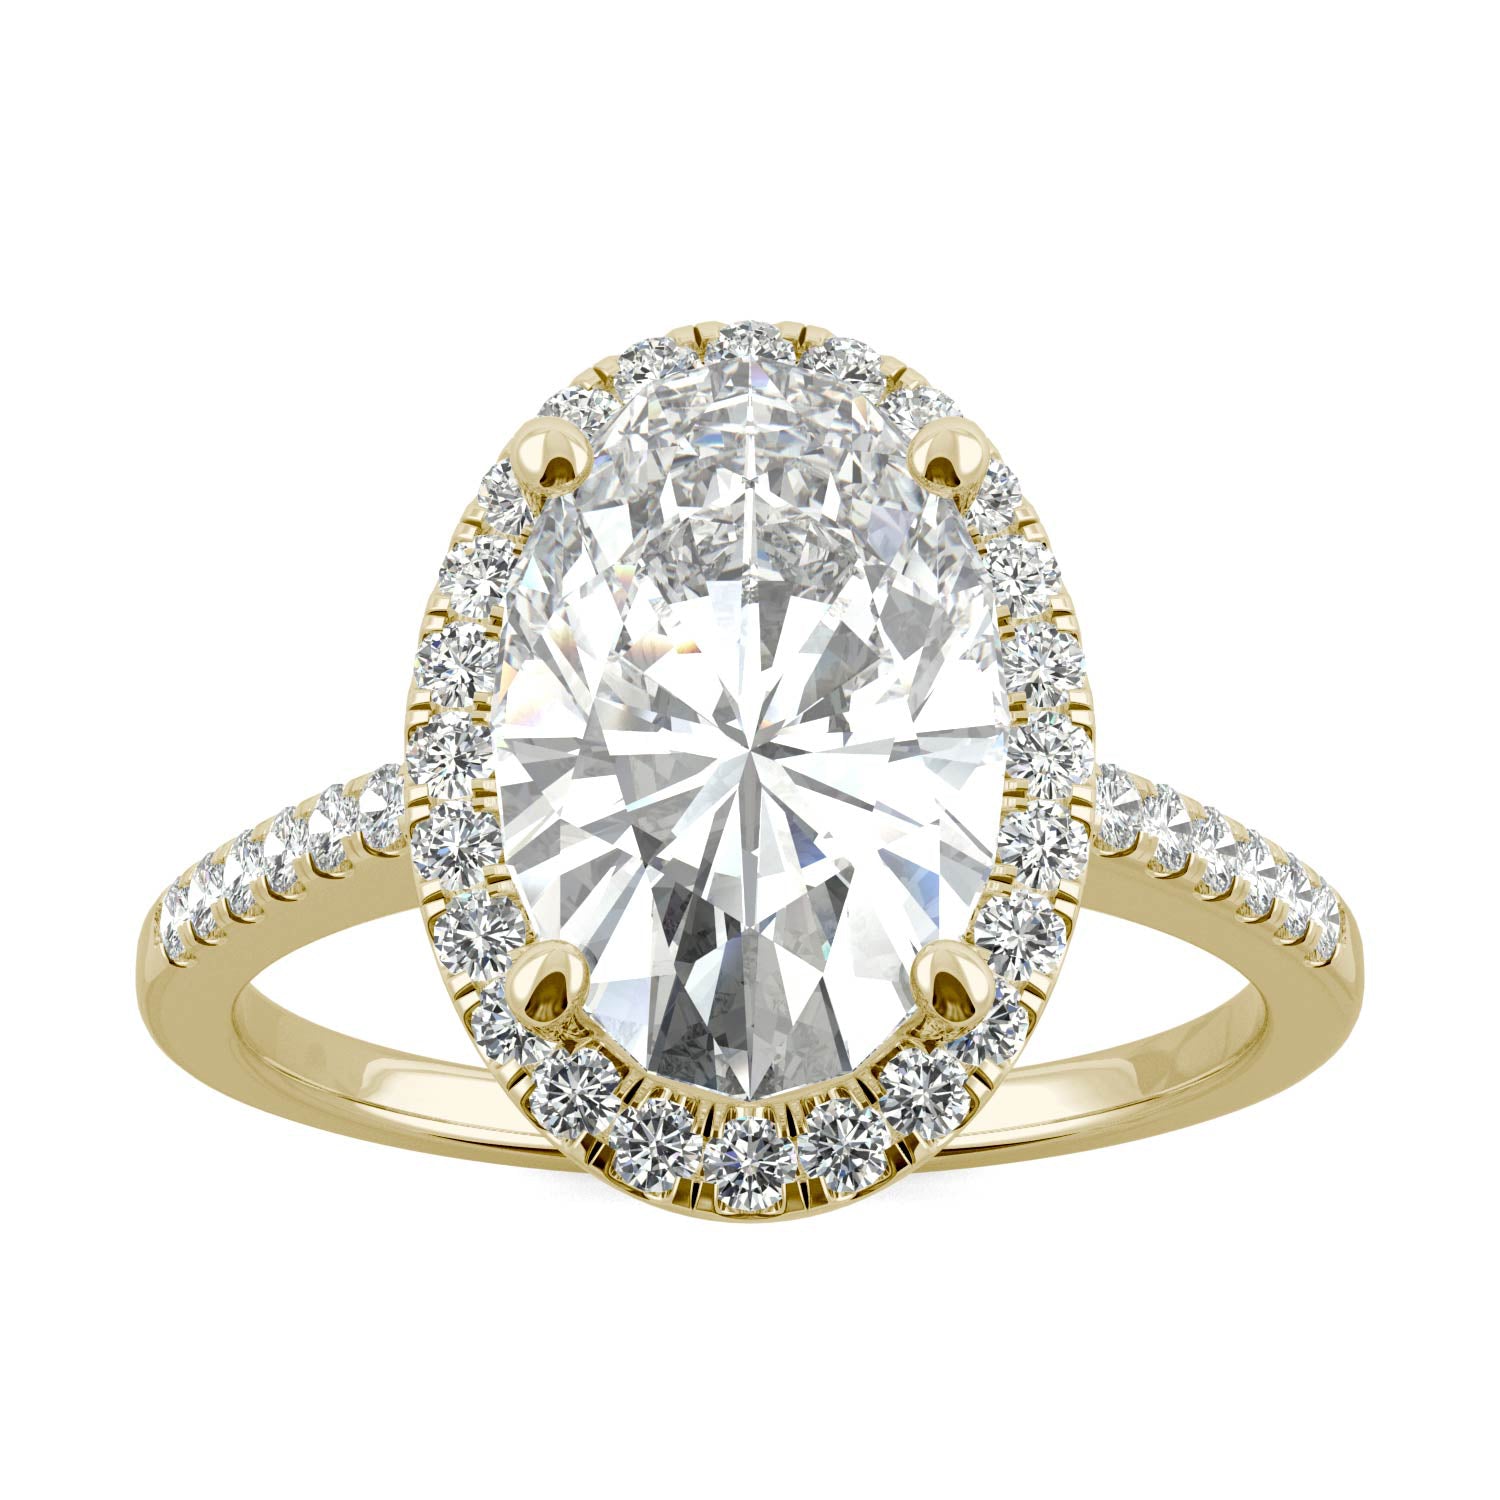 4.75 CTW DEW Elongated Oval Moissanite Halo Ring in 14K Yellow Gold